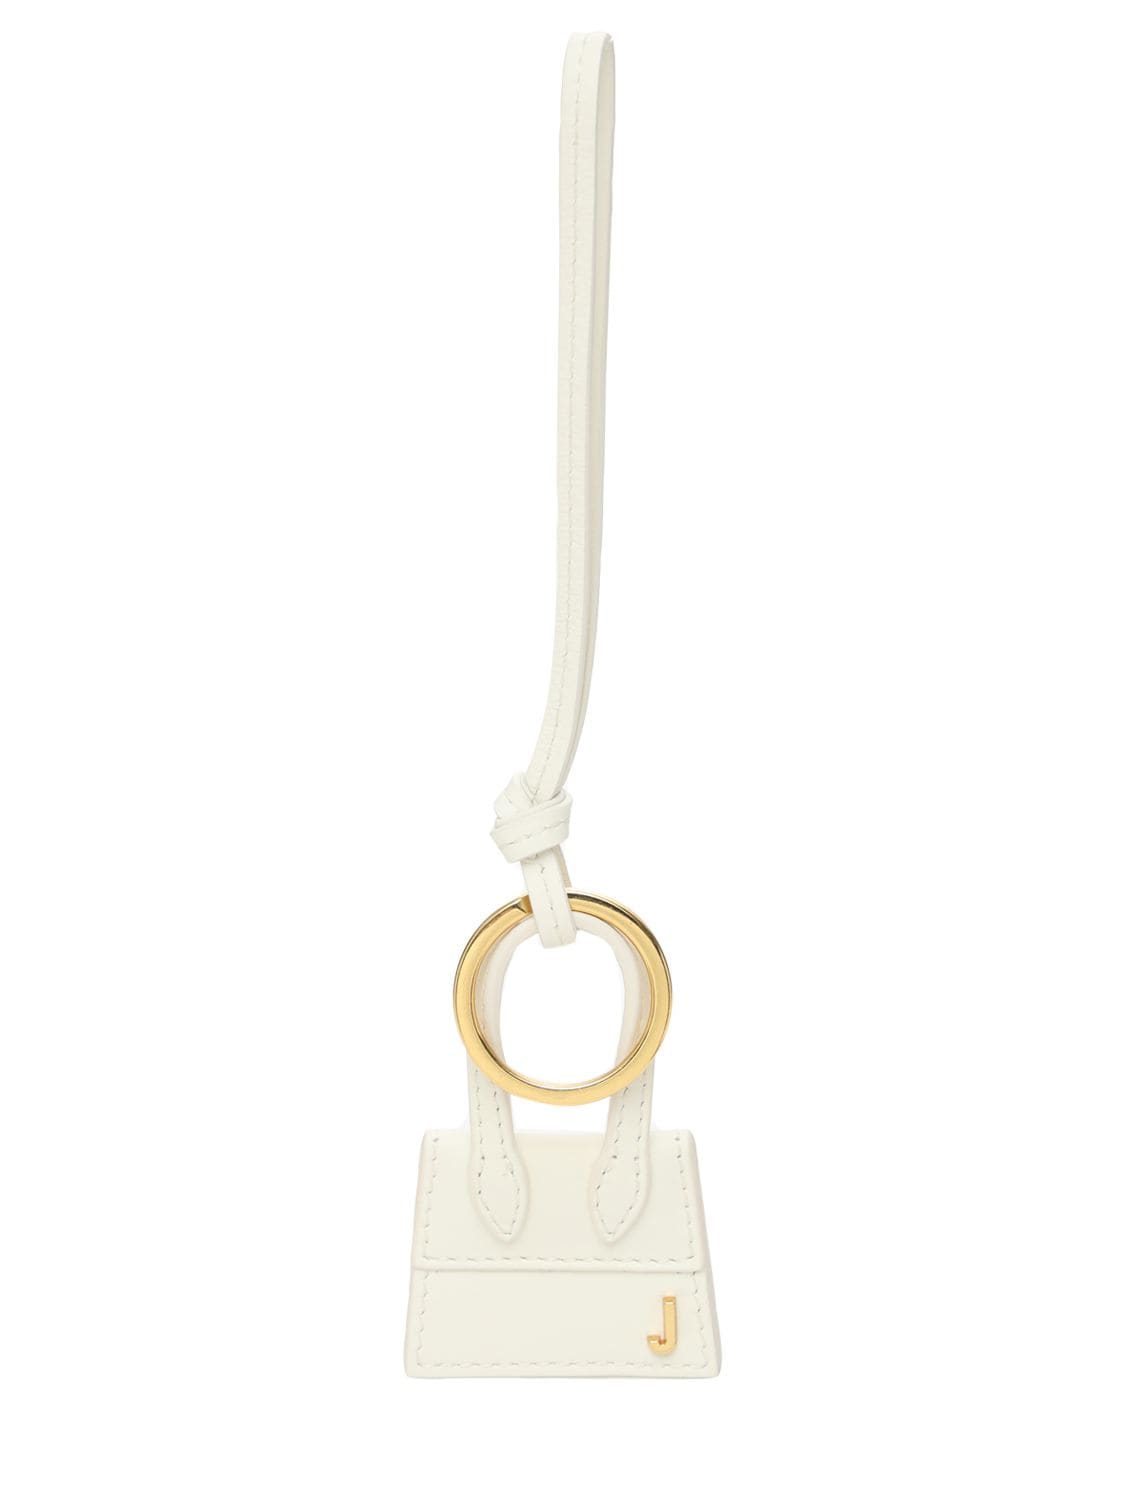 Jacquemus Le Porte Cle Chiquito Key Holder In White